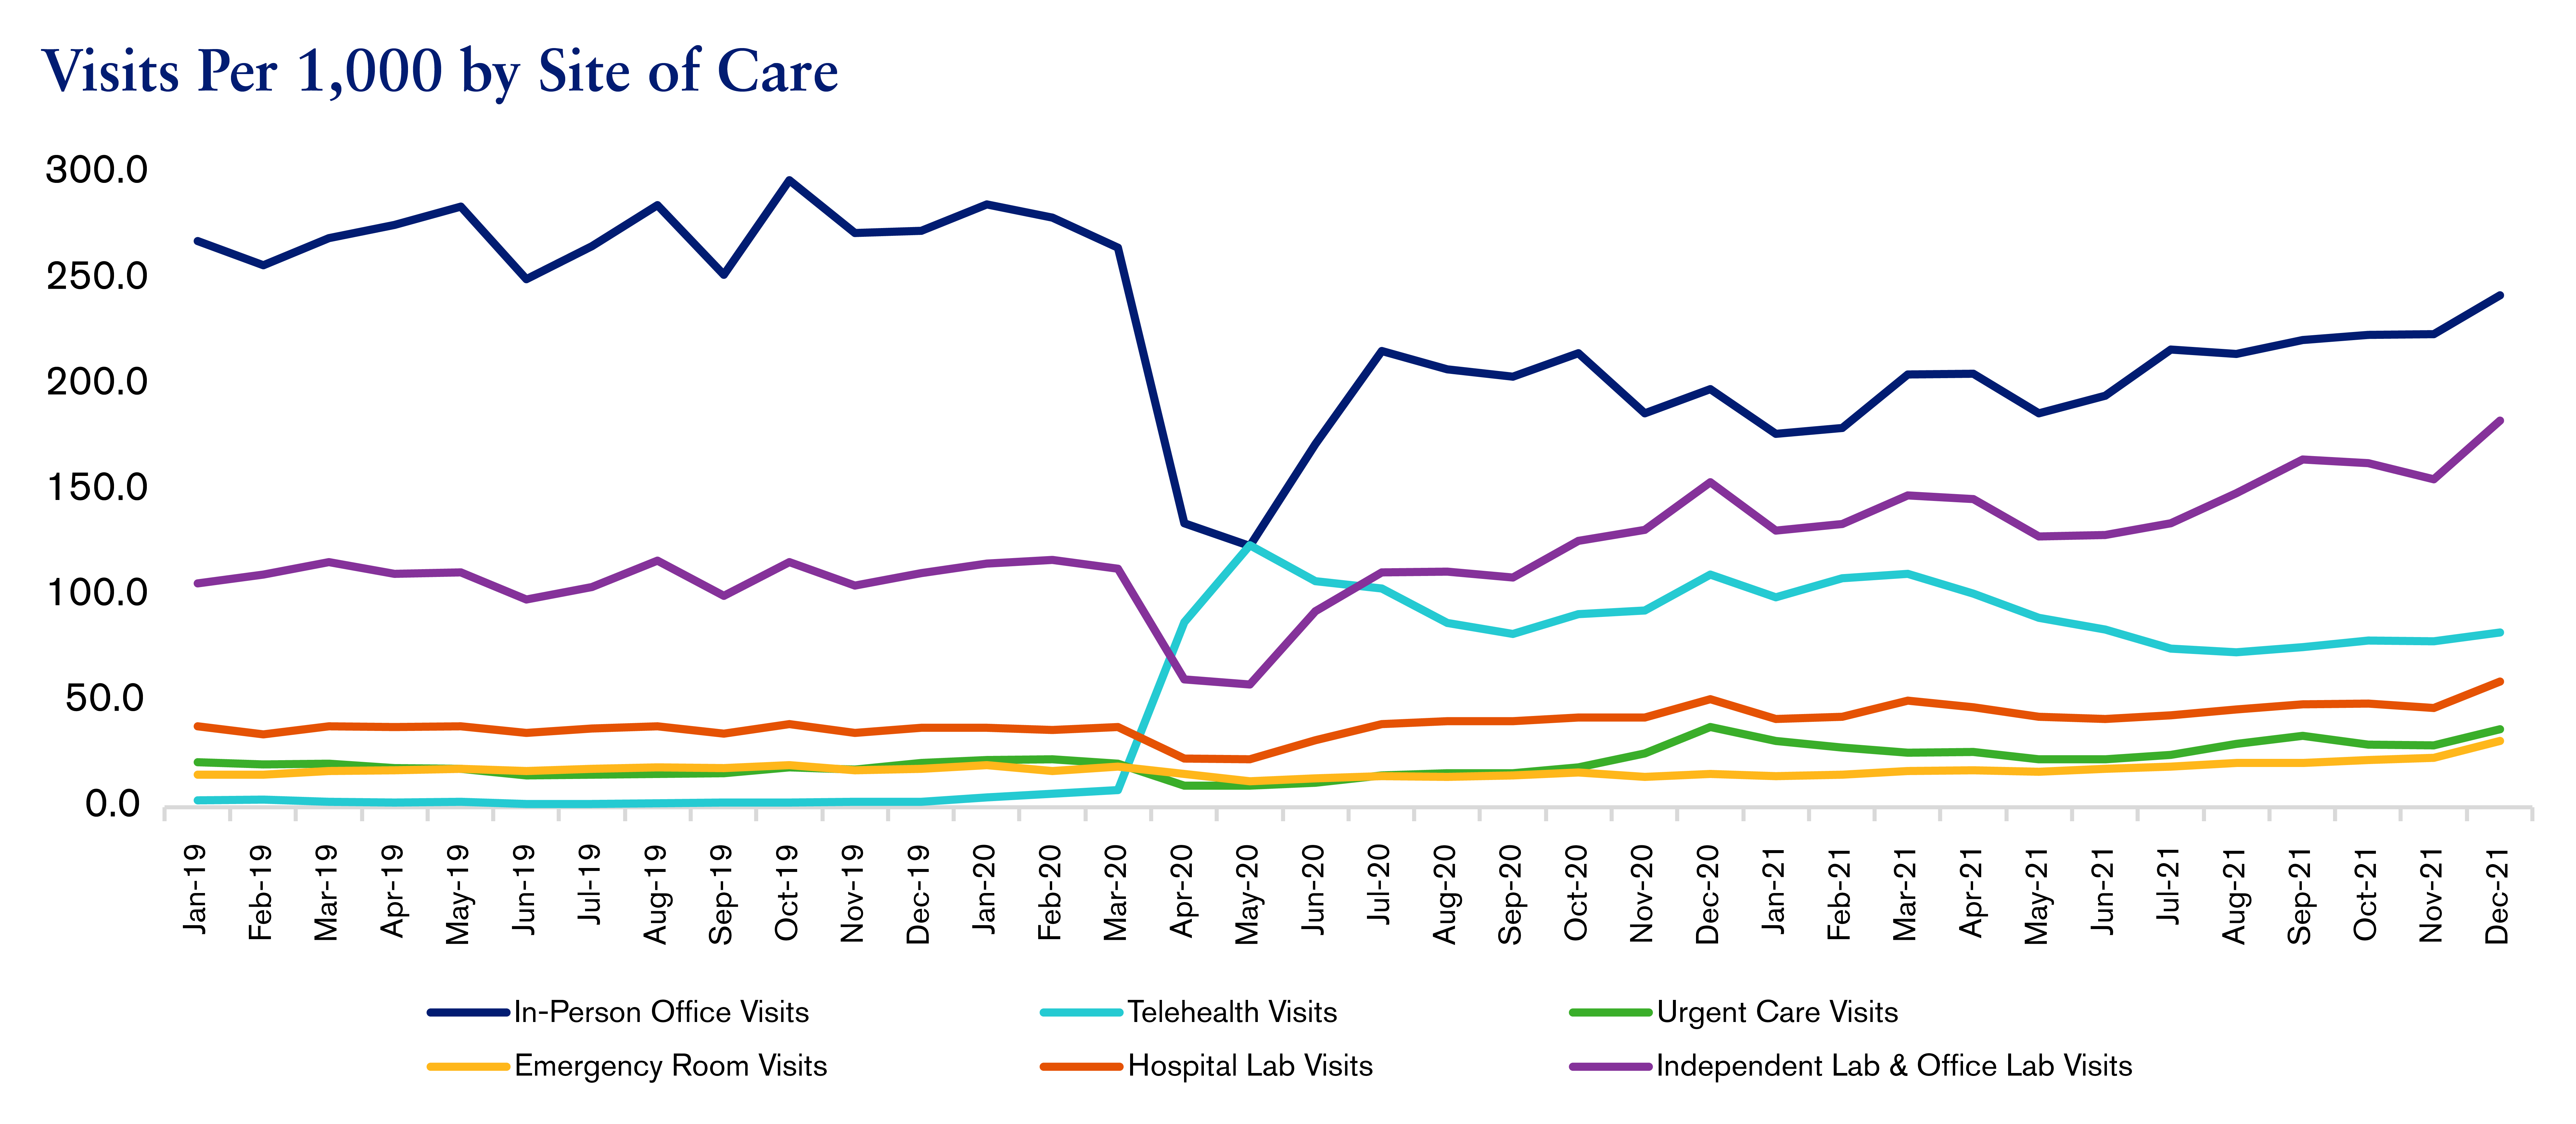 Visits Per 1,00 by Site of Care